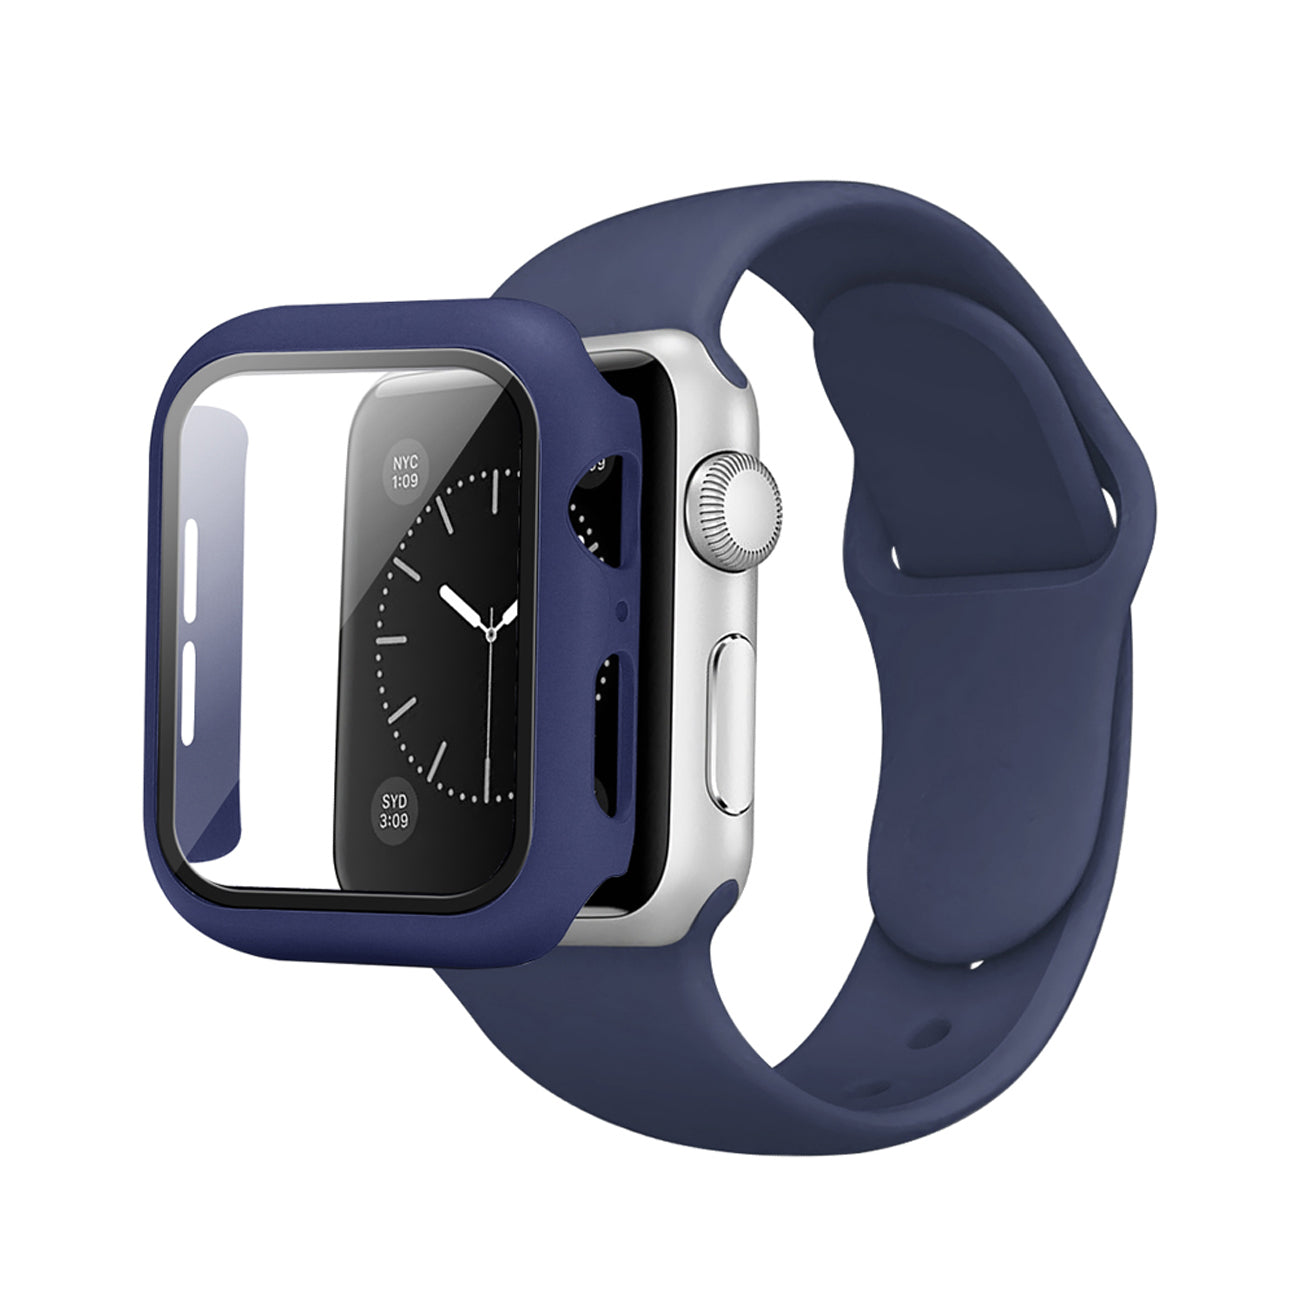 Watch Case PC With Glass Screen Protector, Silicone Watch Band Apple Watch 44mm Navy Color